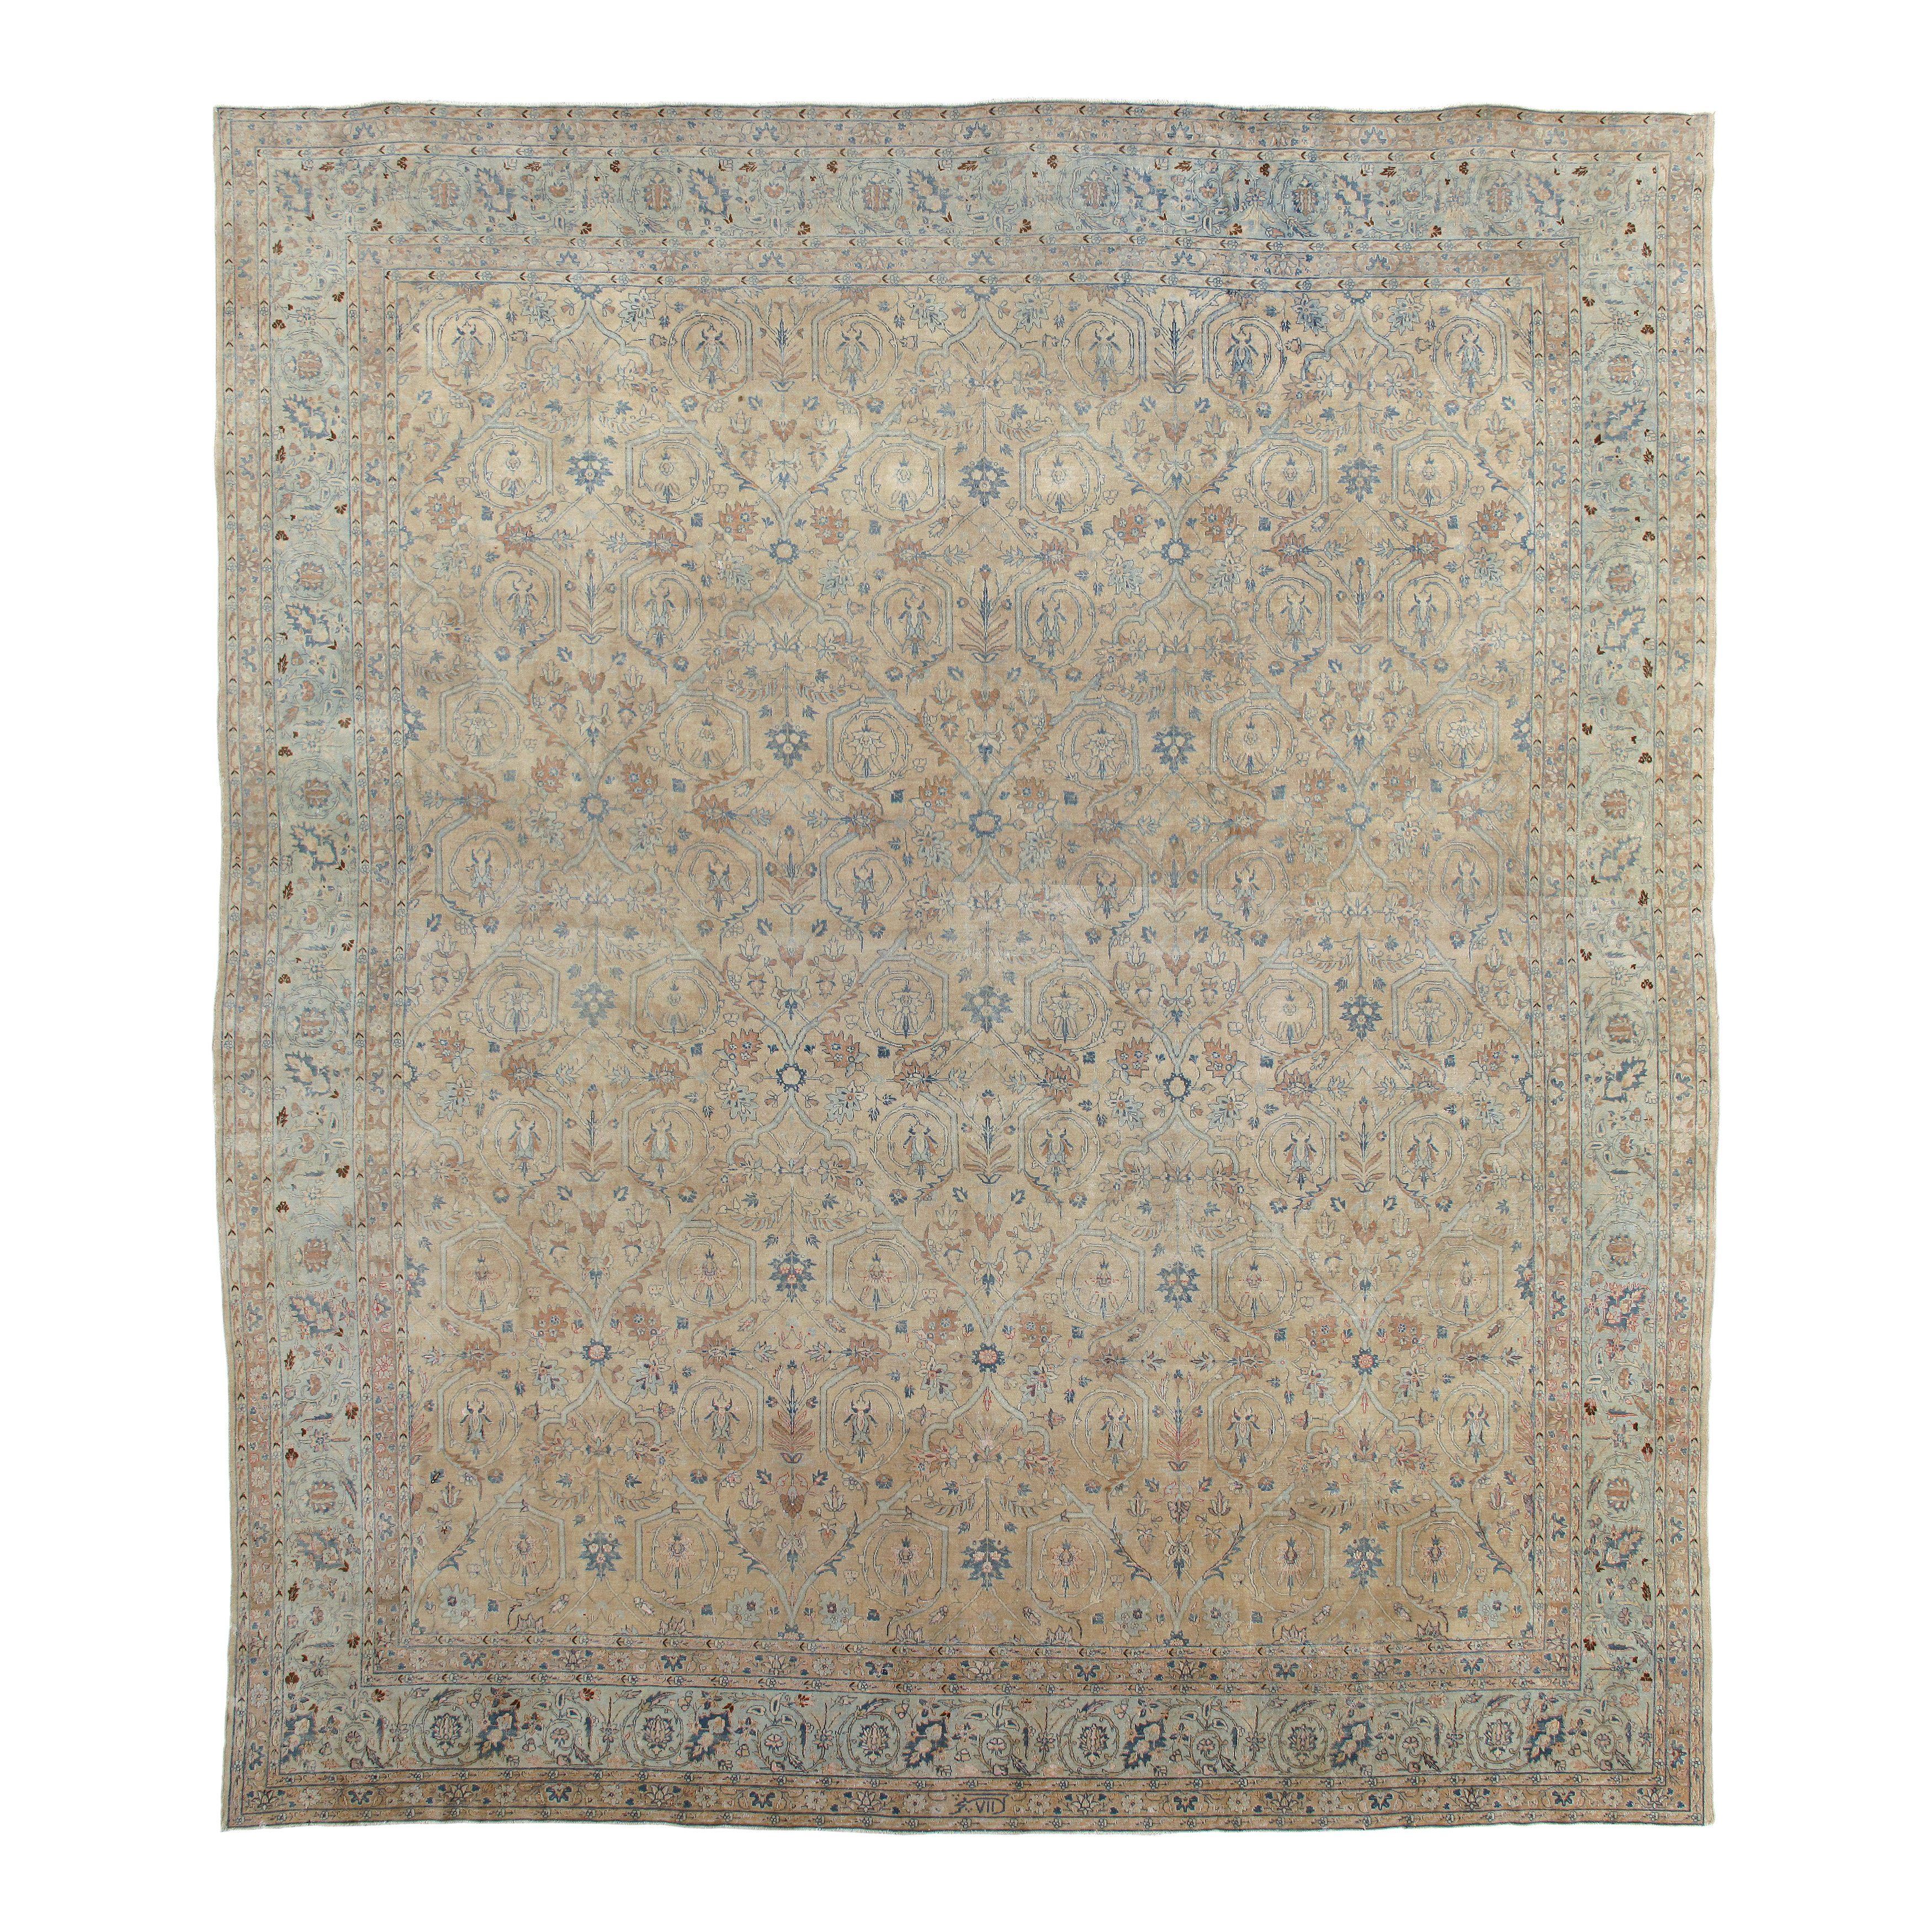 This Tabriz rug is hand-knotted and made of 100% wool. 